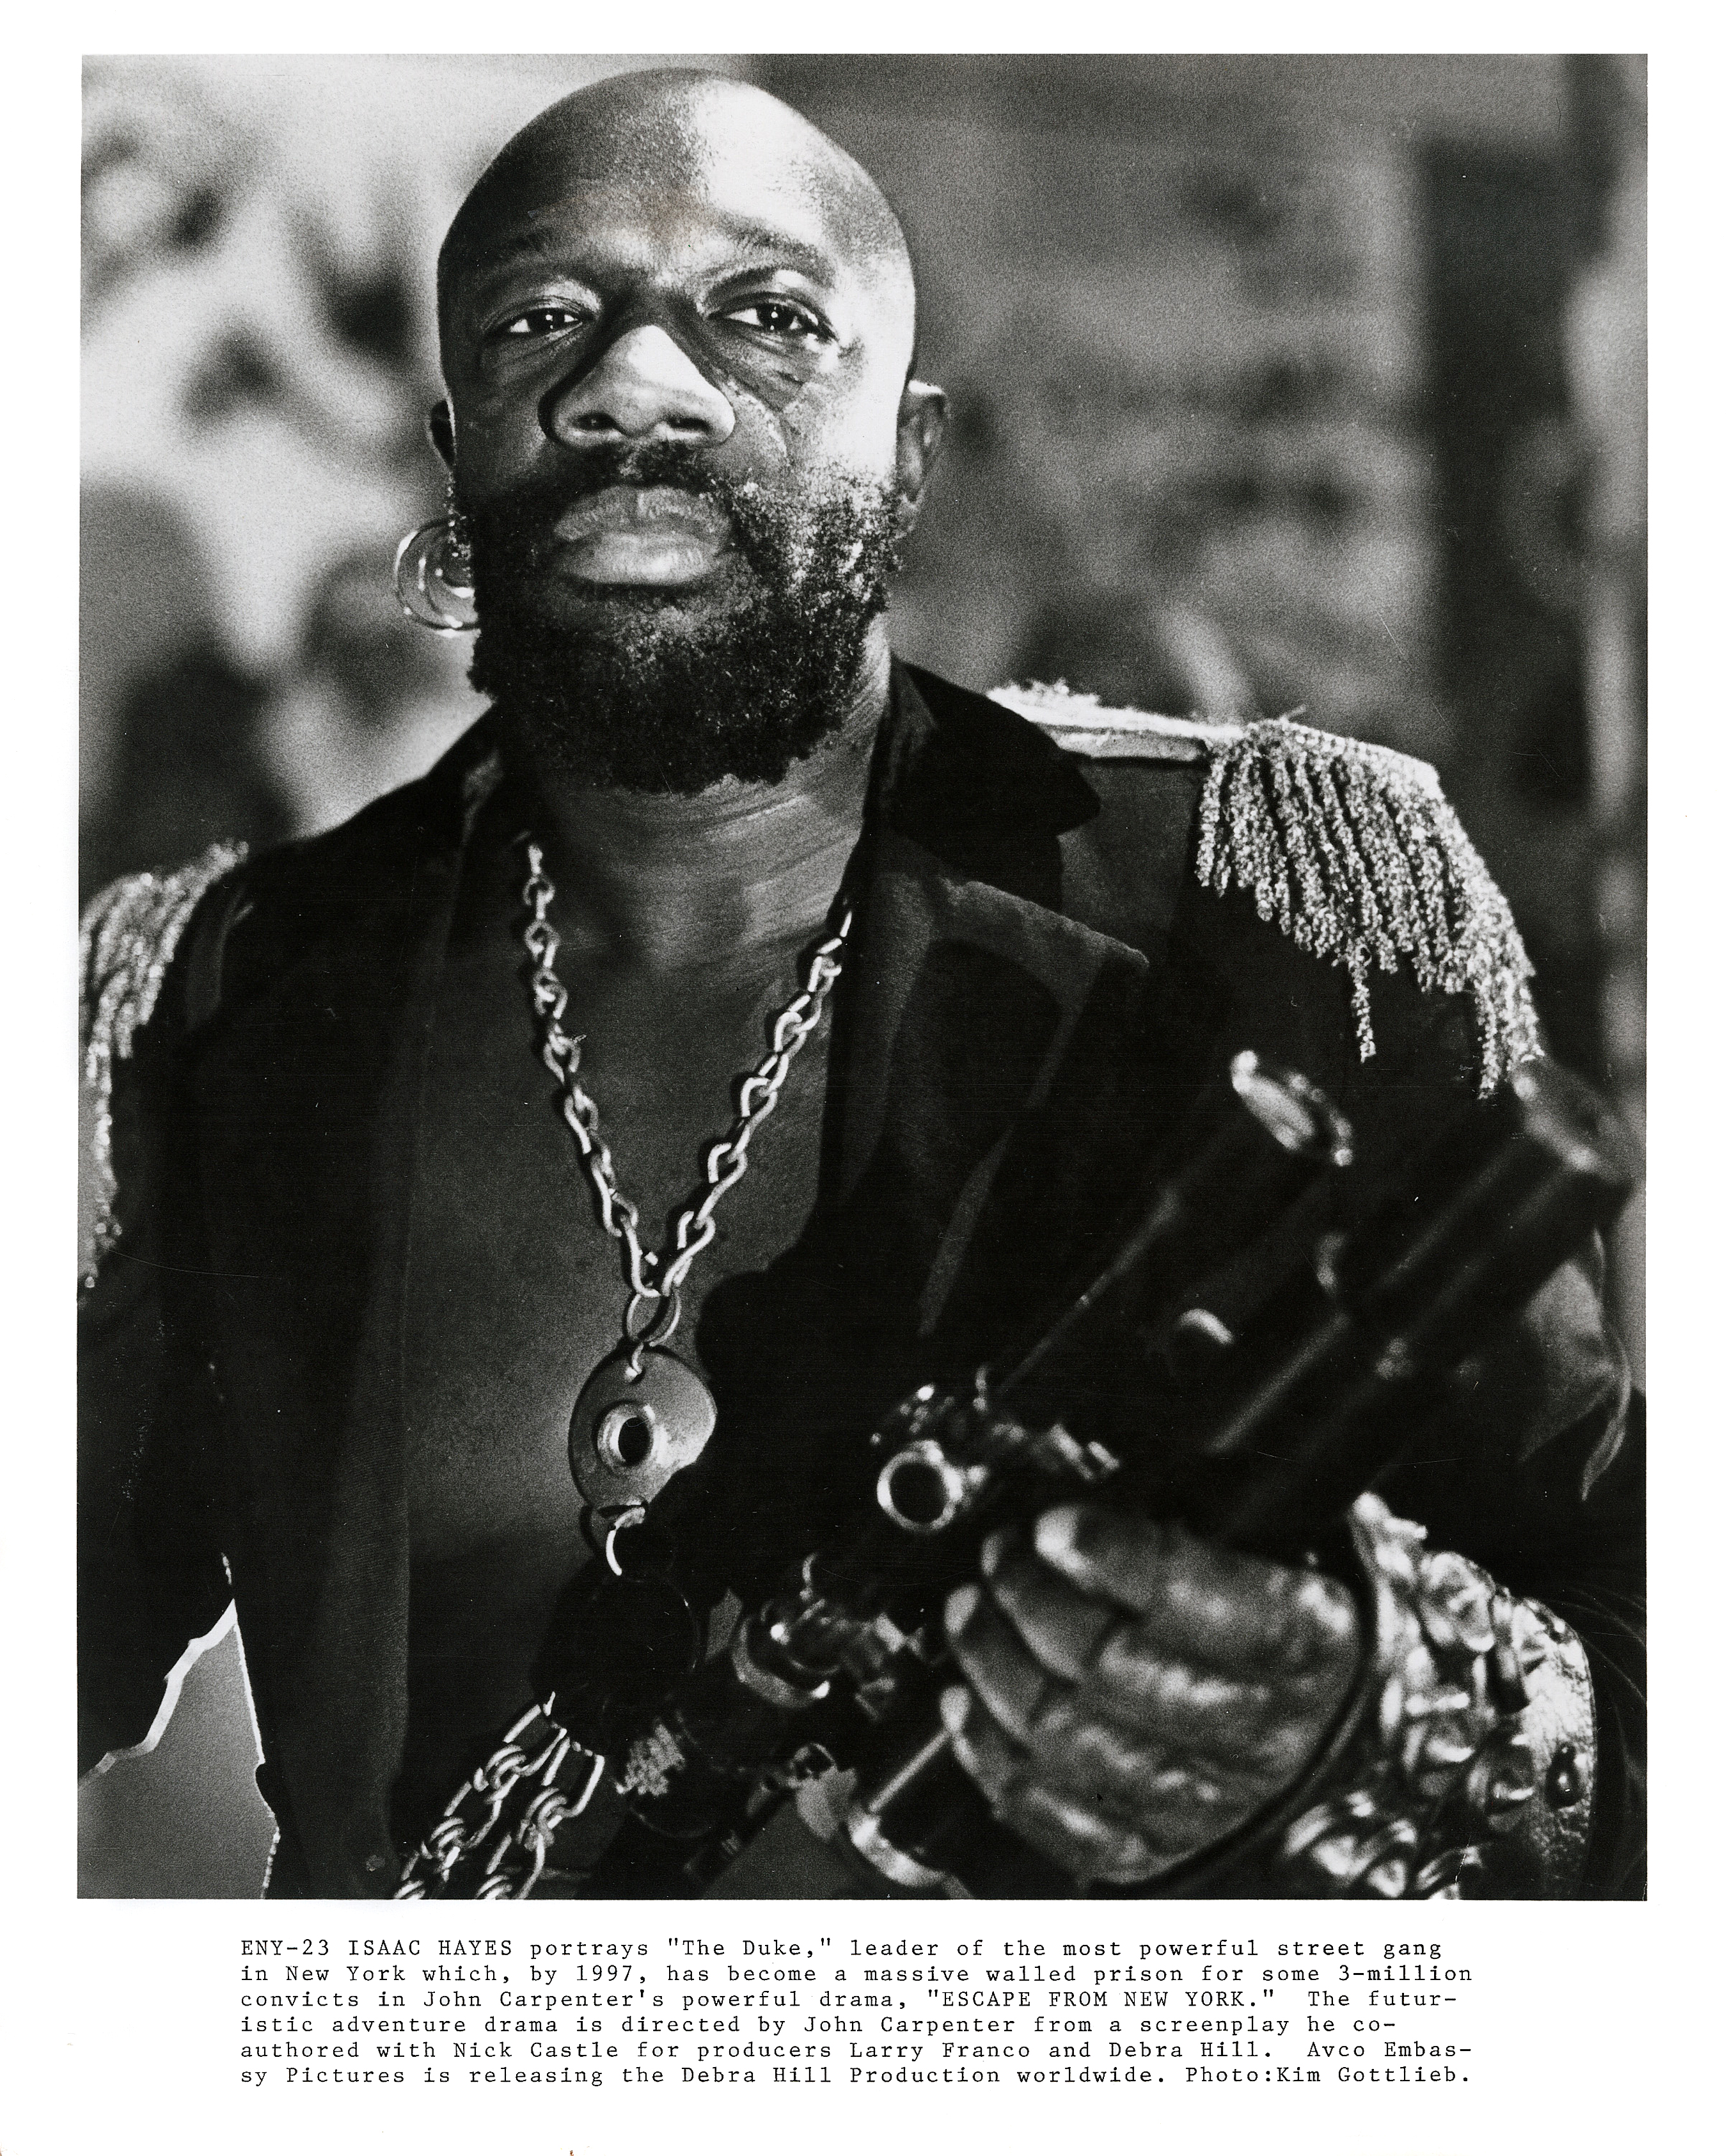 Isaac Hayes in Escape from New York (1981)